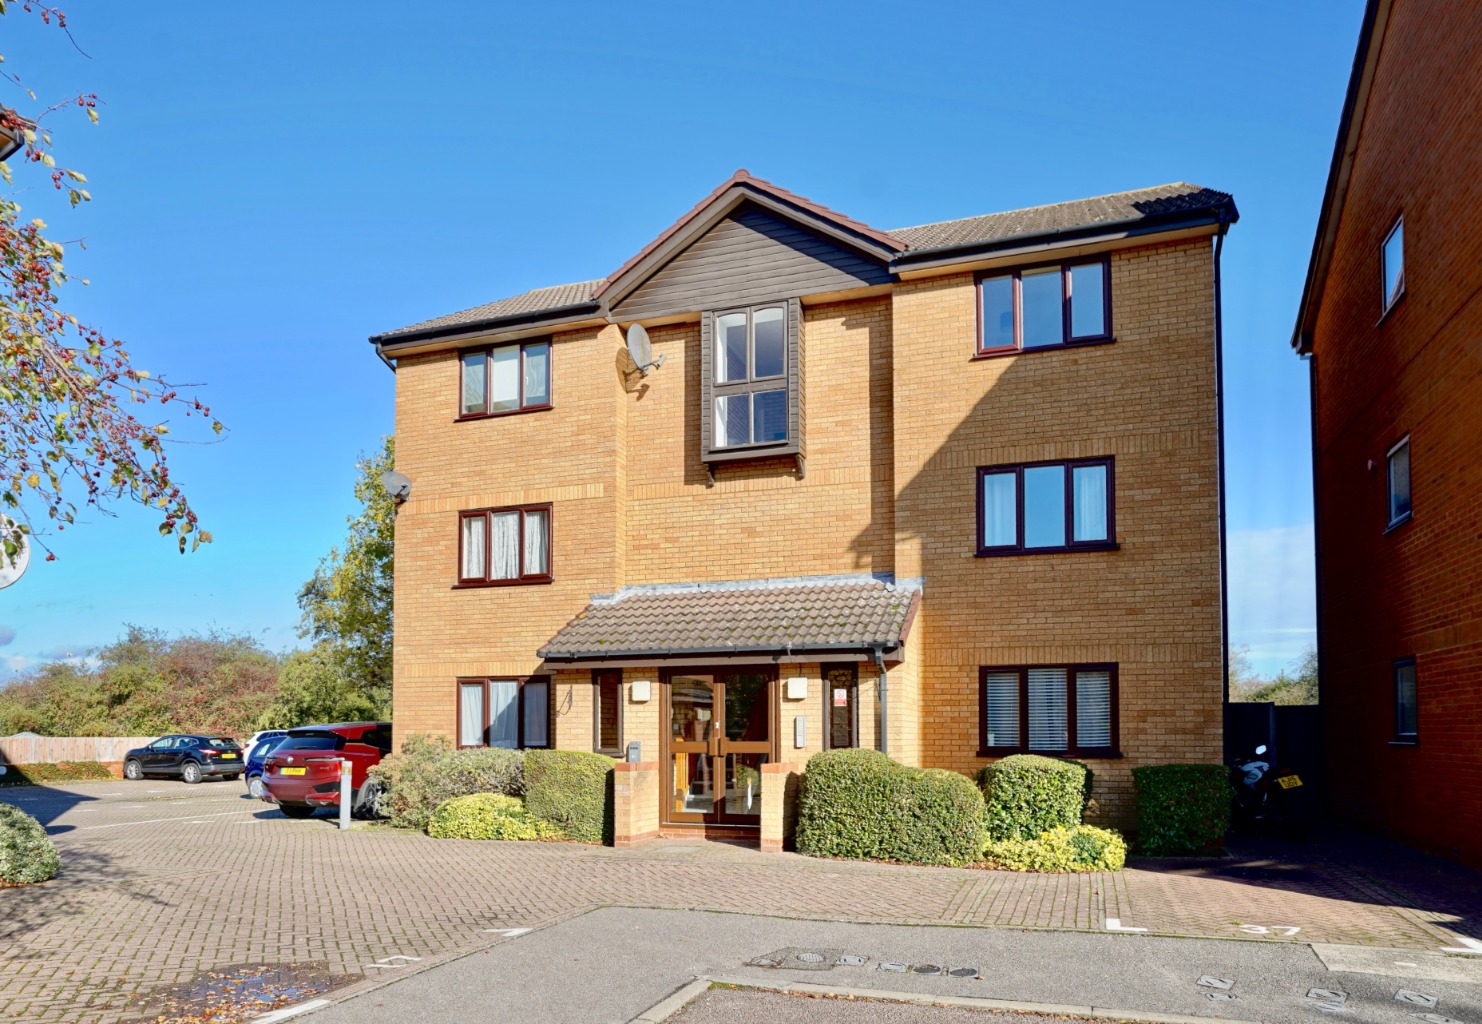 2 bed flat for sale in Ullswater, Huntingdon, PE29